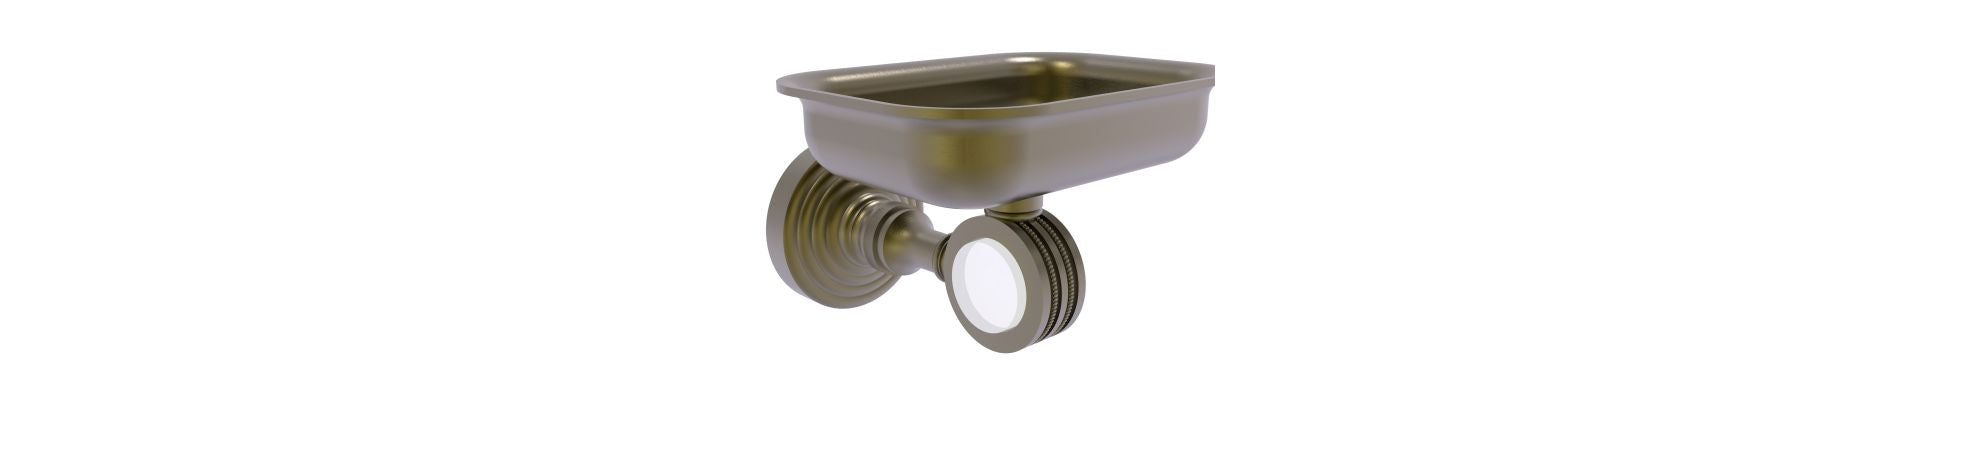 Brass Soap Dishes | Wall Mounted Soap Dishes | Allied Brass